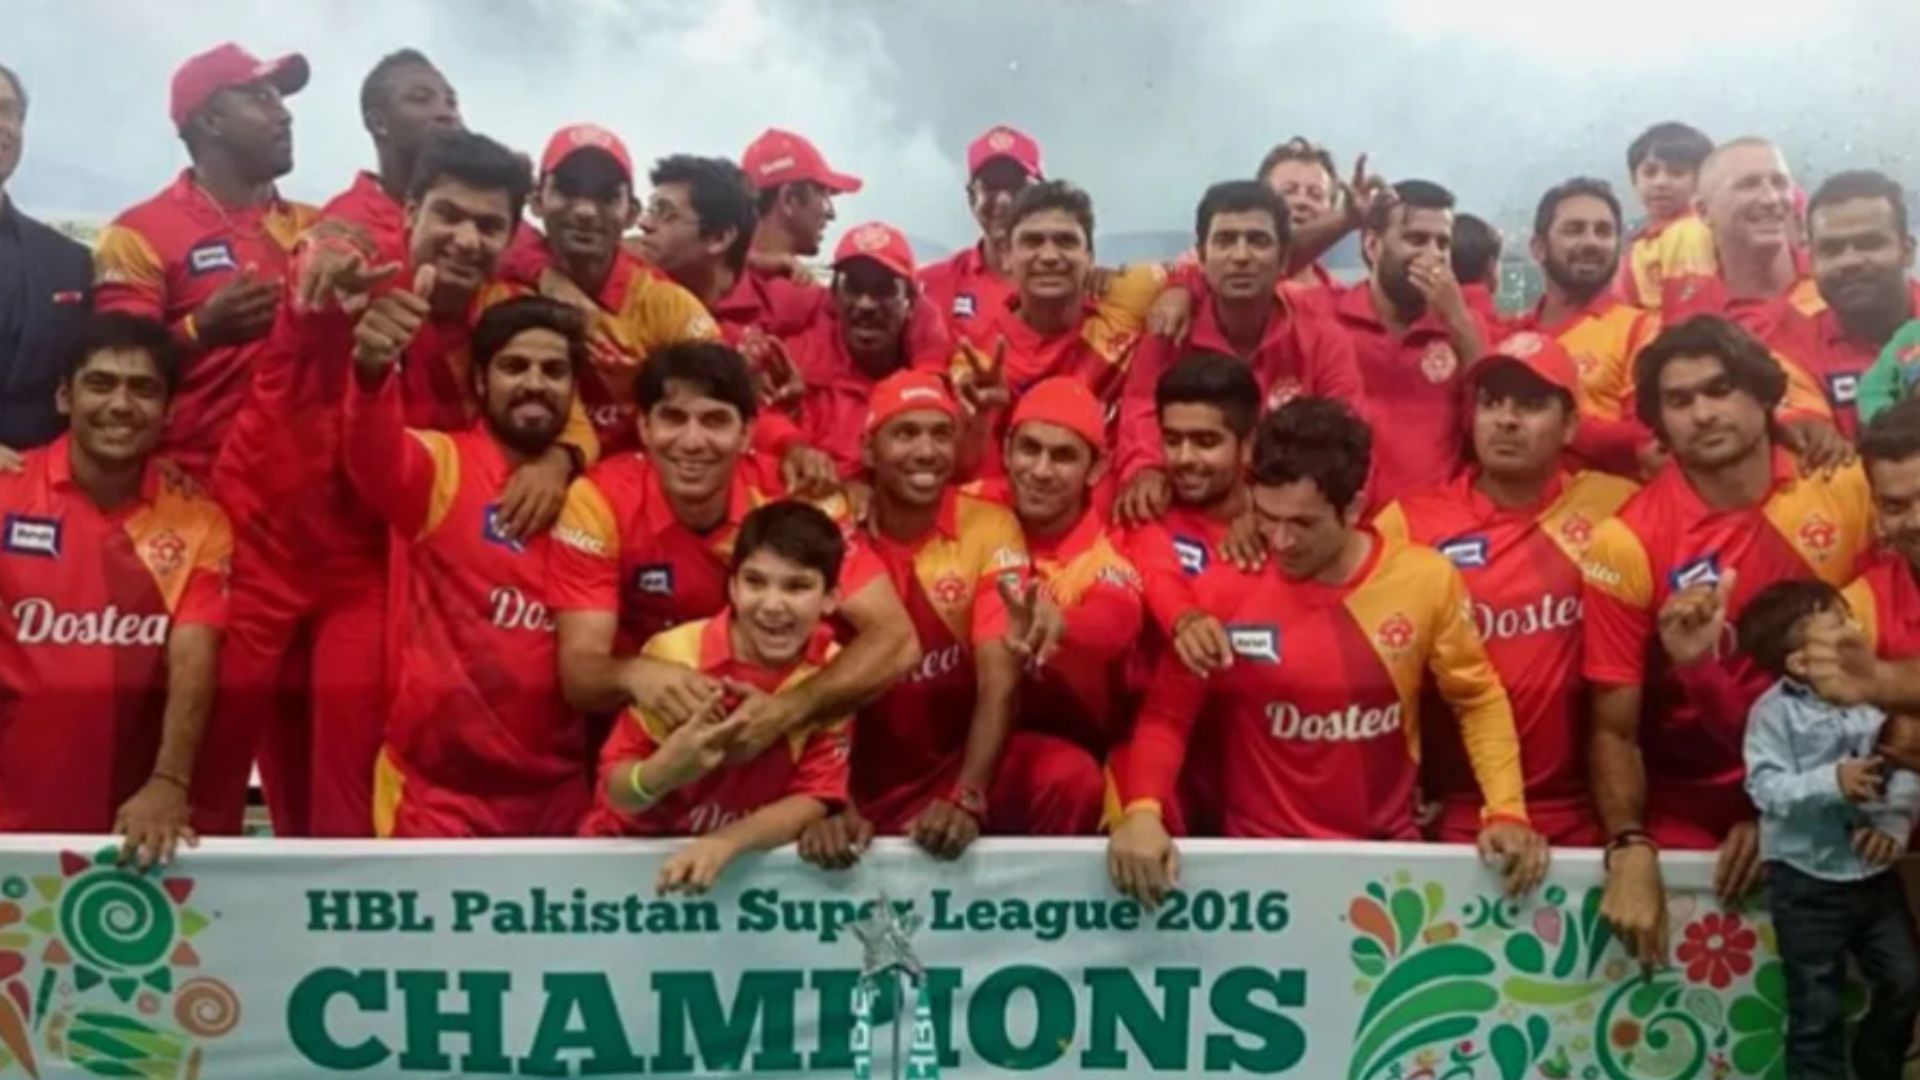 Islamabad United players and support staff pose for photographs after winning PSL 2016. (Pic: PSL)